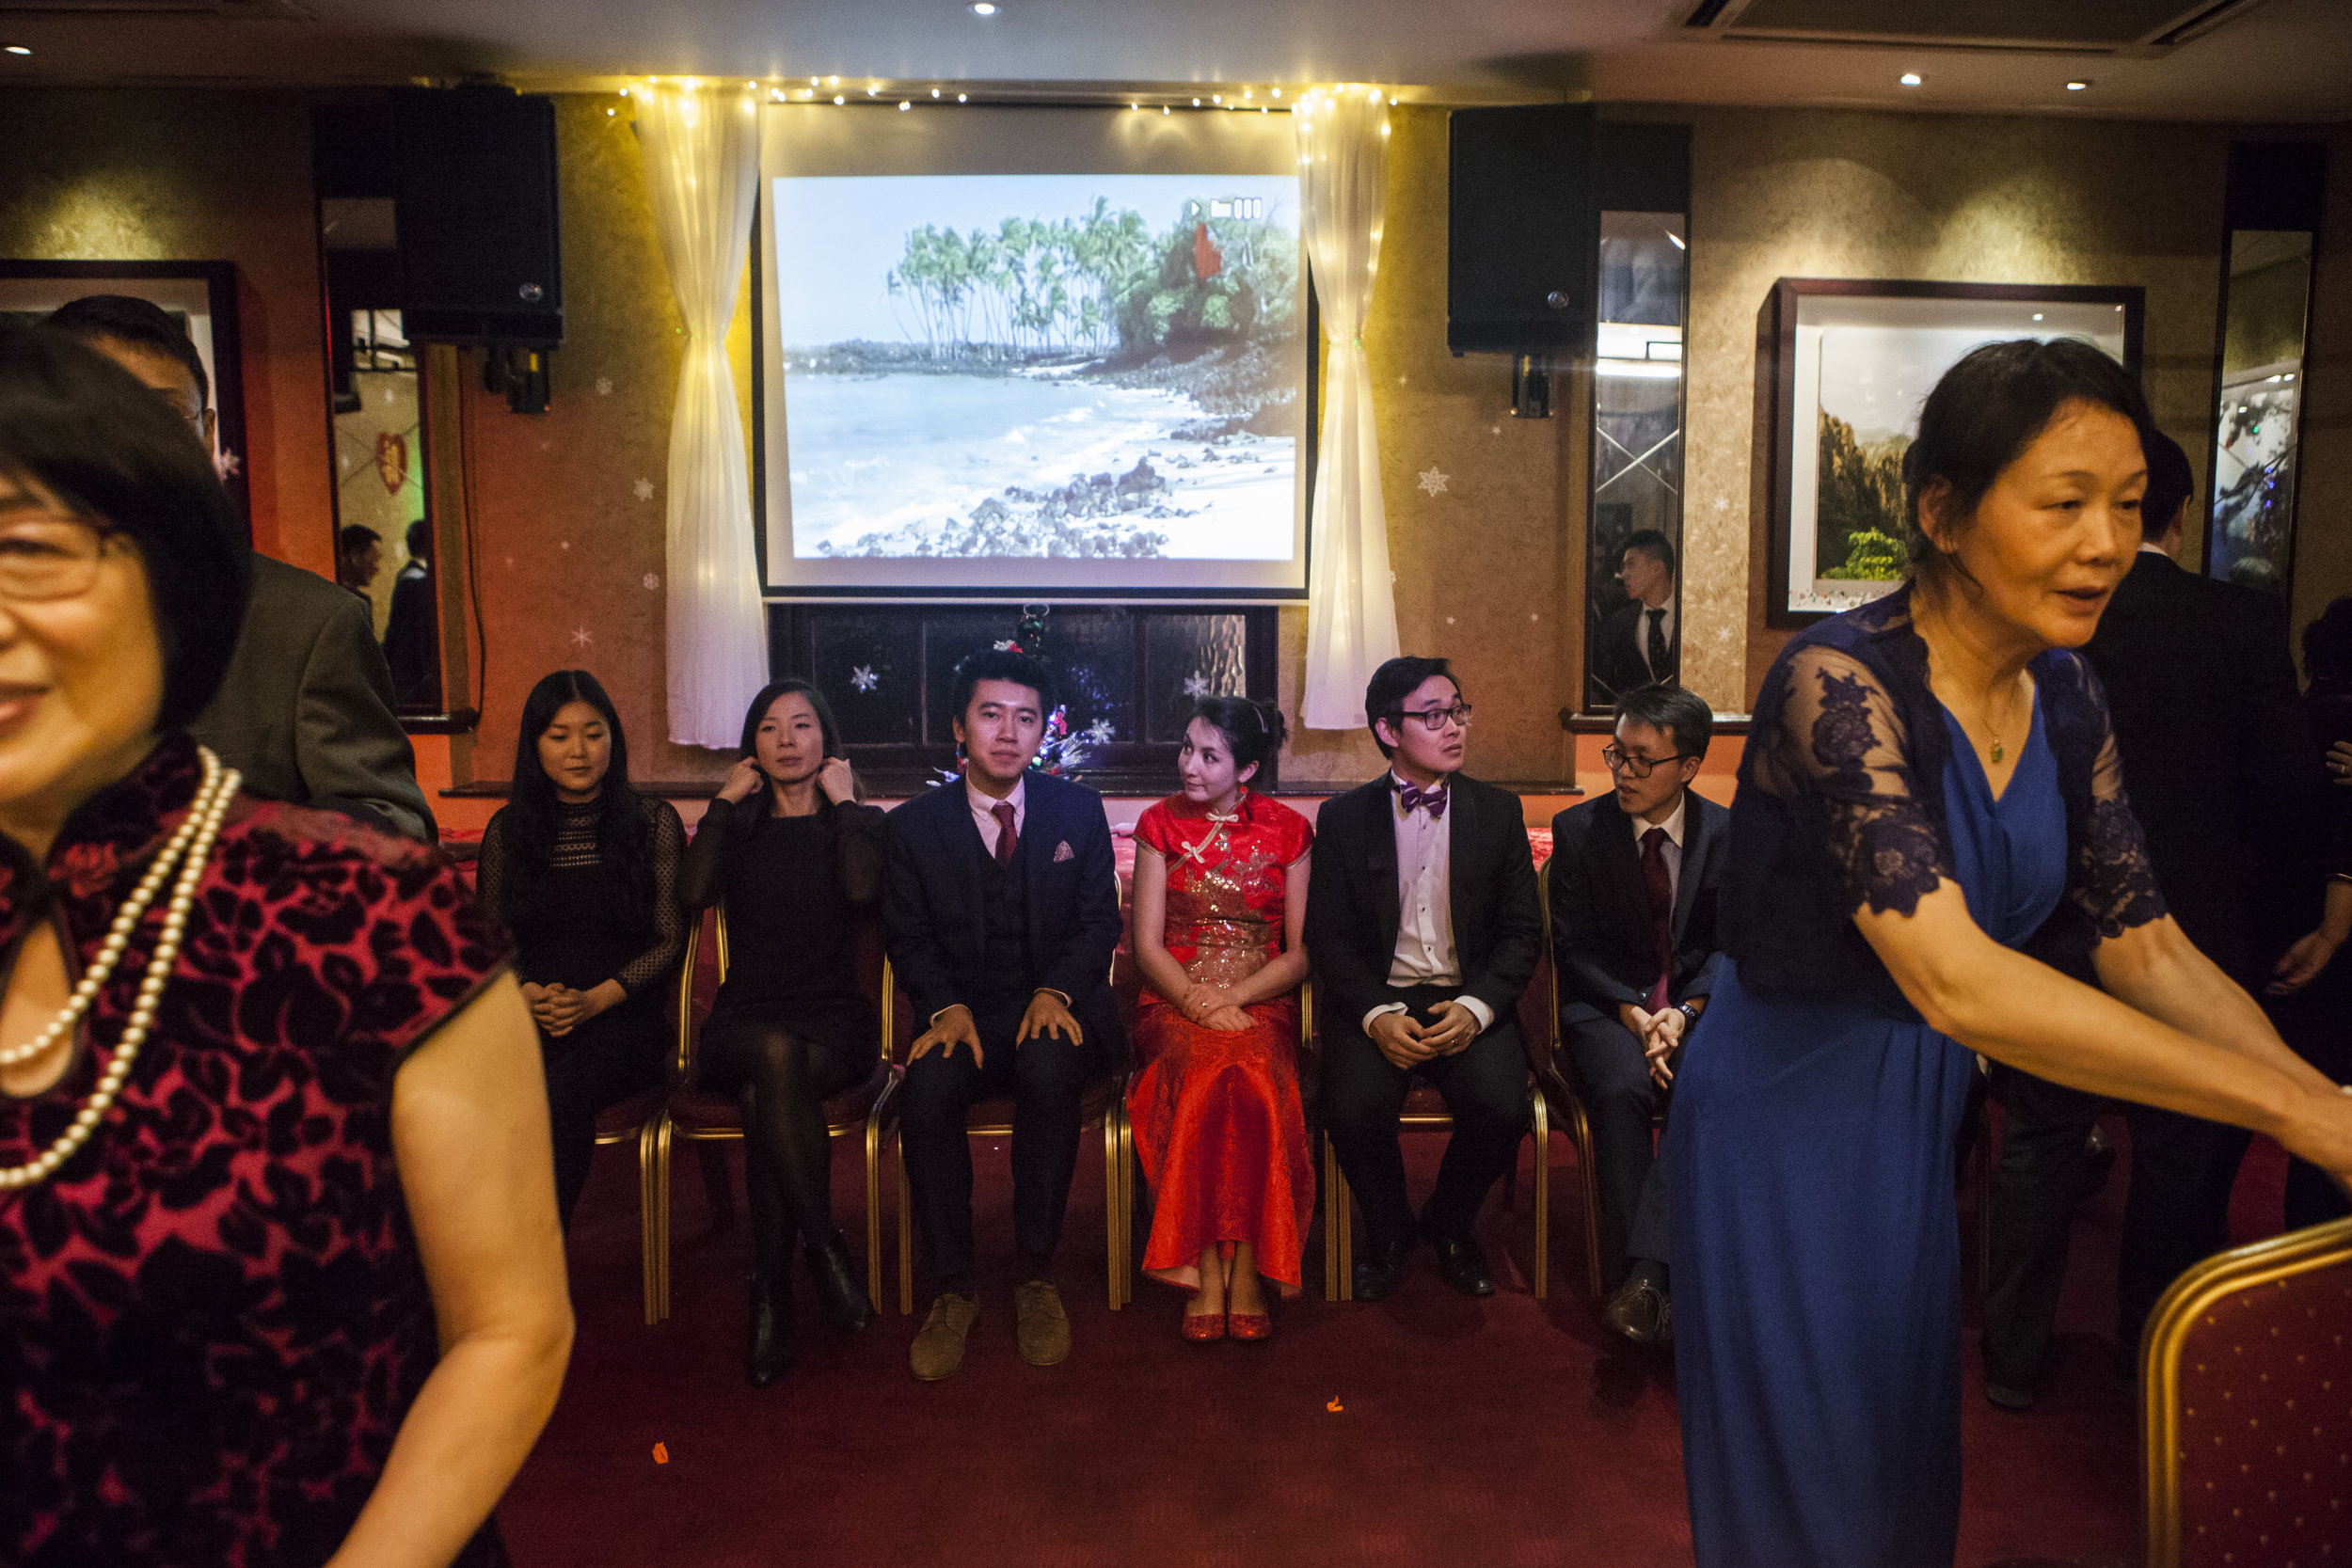  Second generation Chinese migrants sit with the bride and groom on stage while the parents prepare the venue for the next event.&nbsp; 